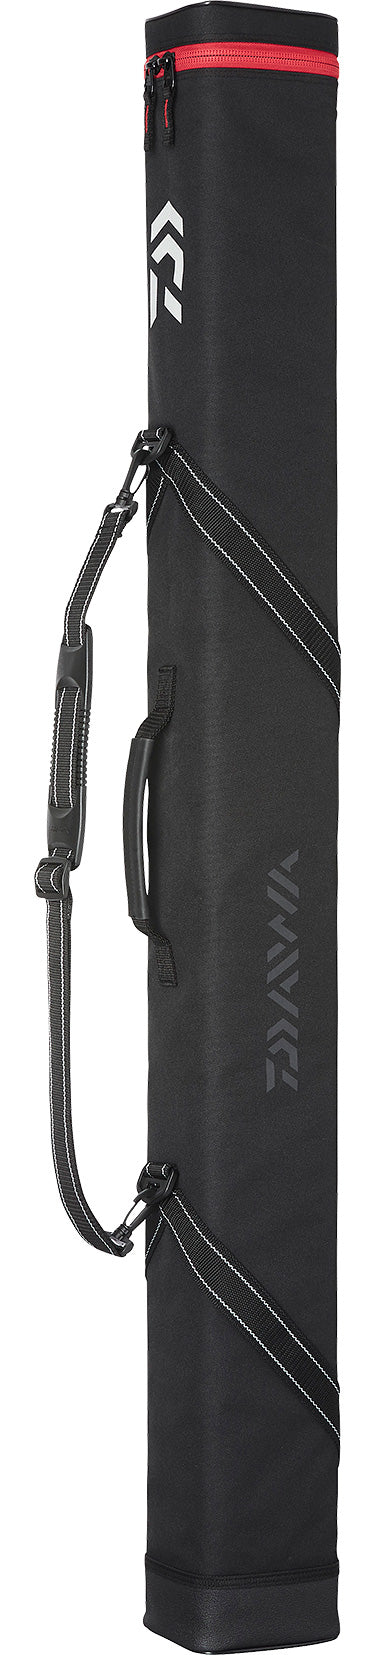 Daiwa Fishing Rod Cases for sale